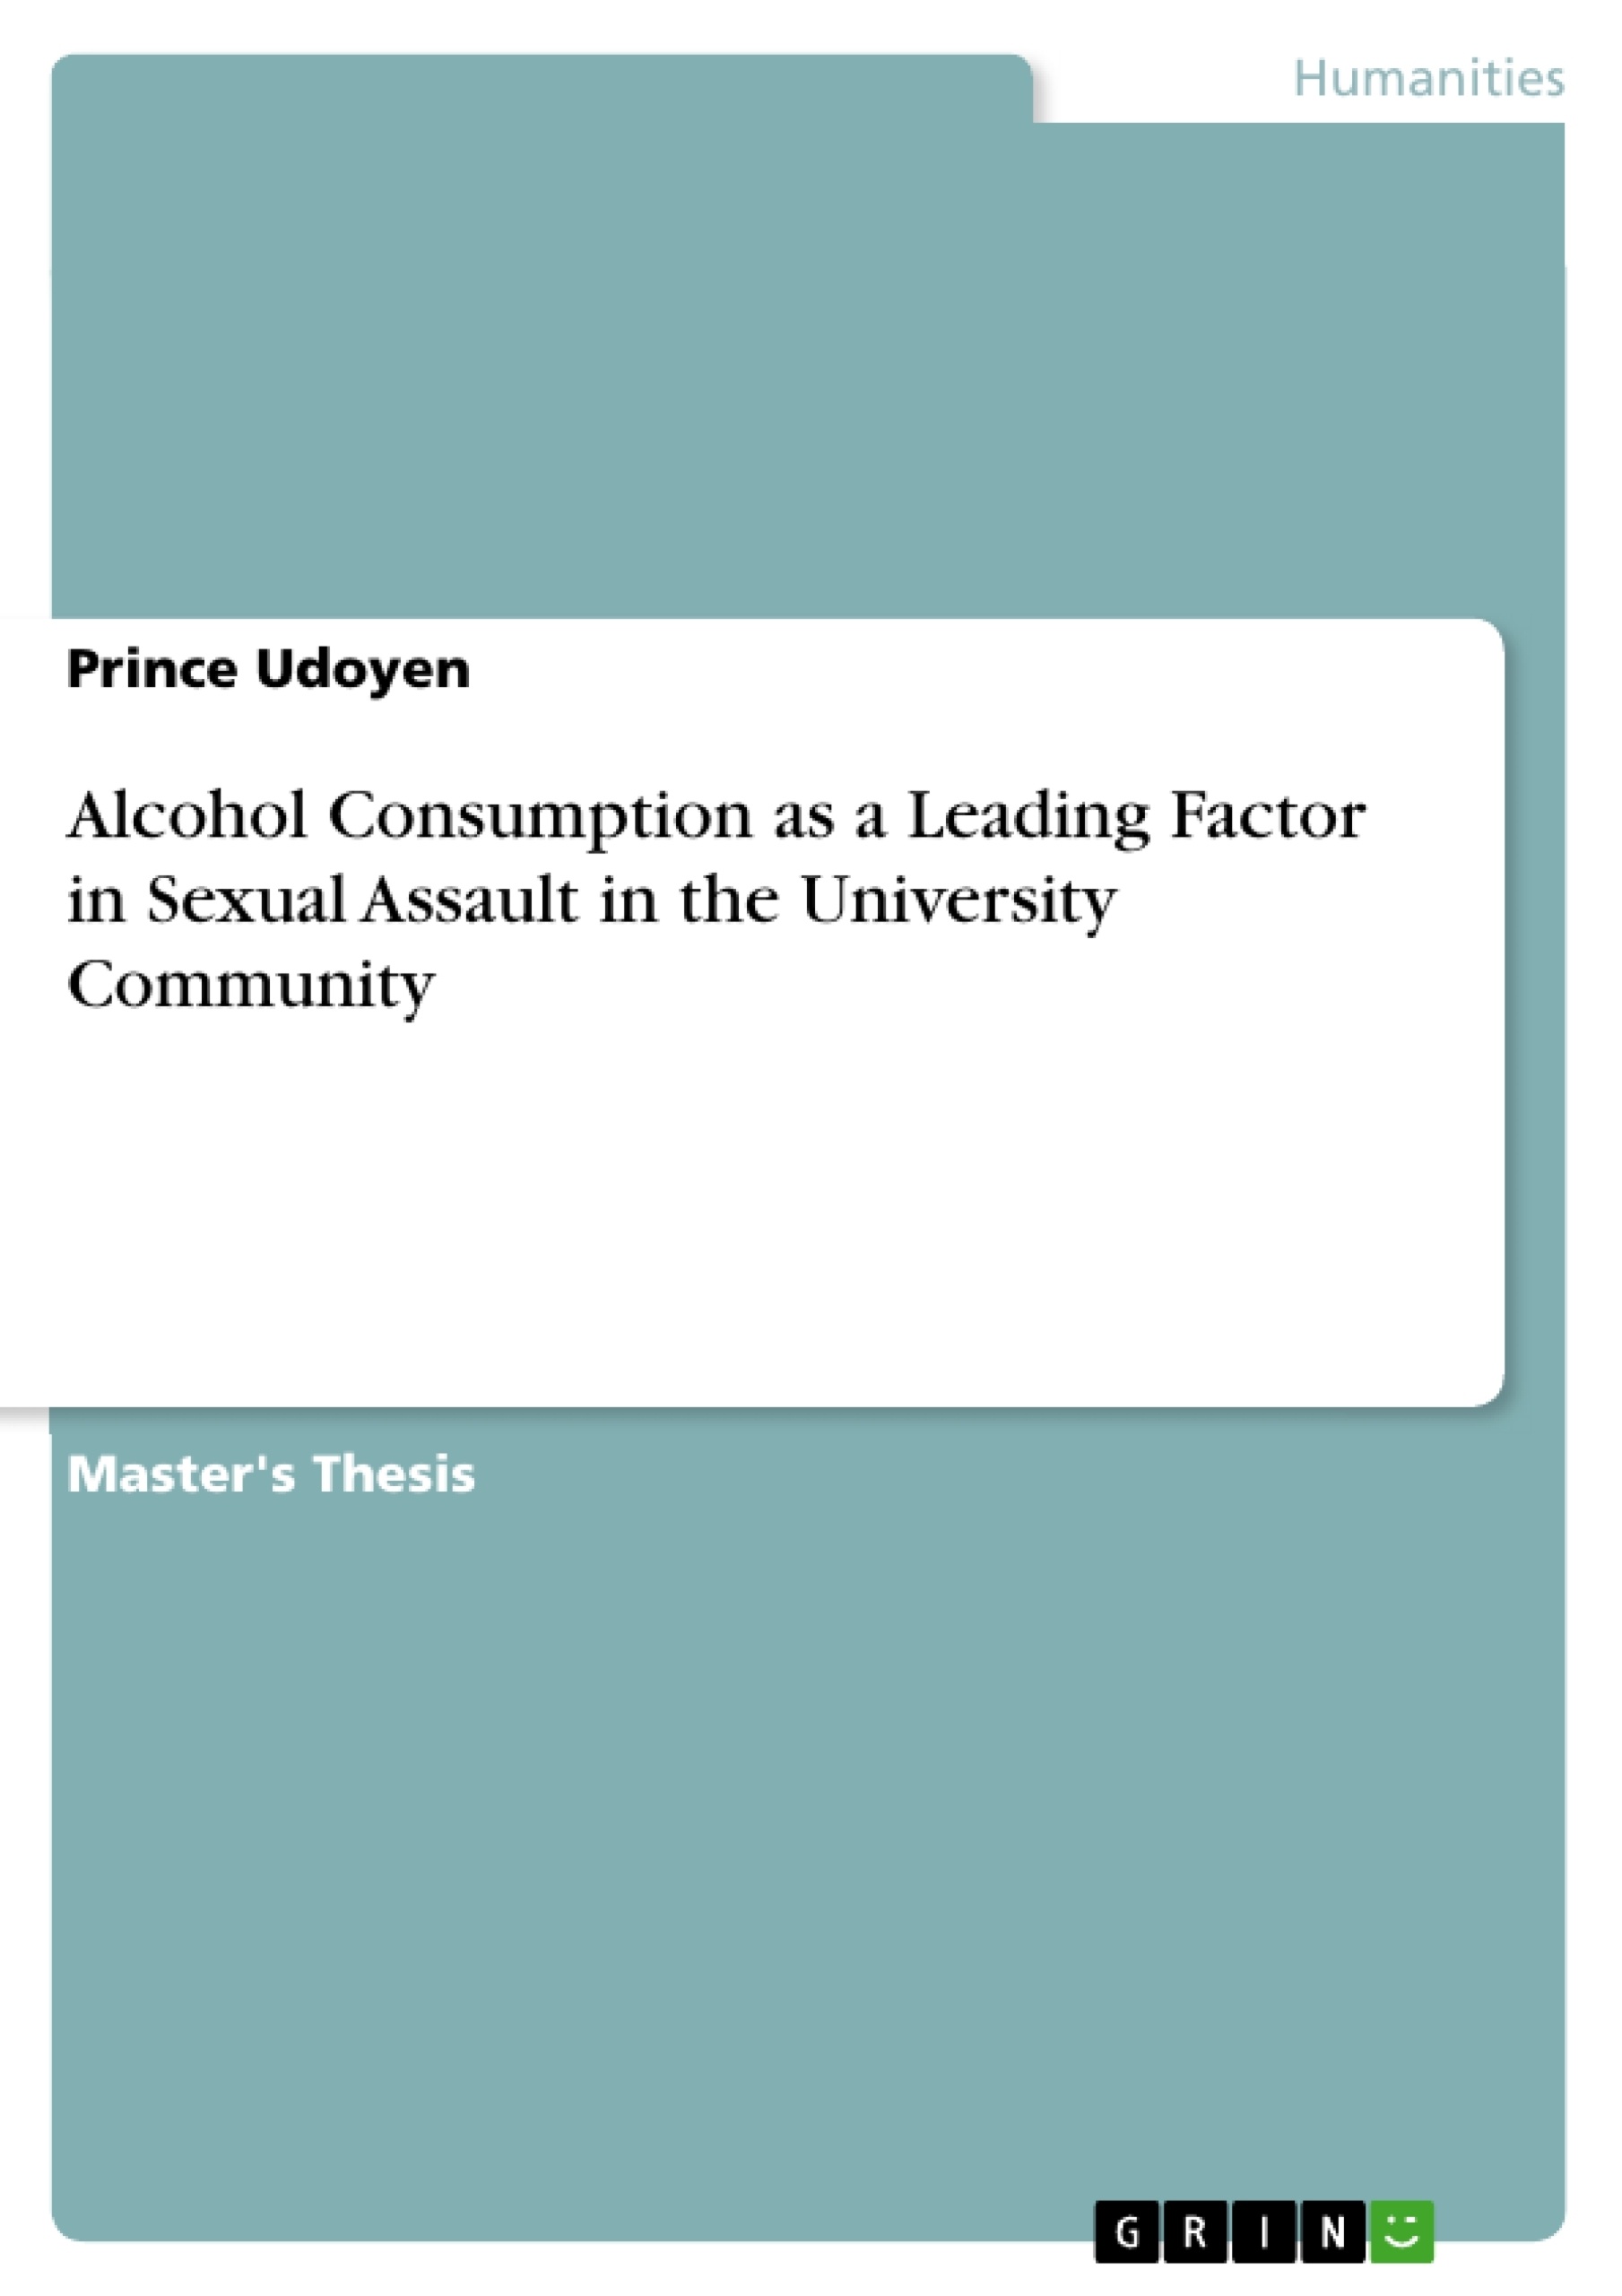 Title: Alcohol Consumption as a Leading Factor in Sexual Assault in the University Community